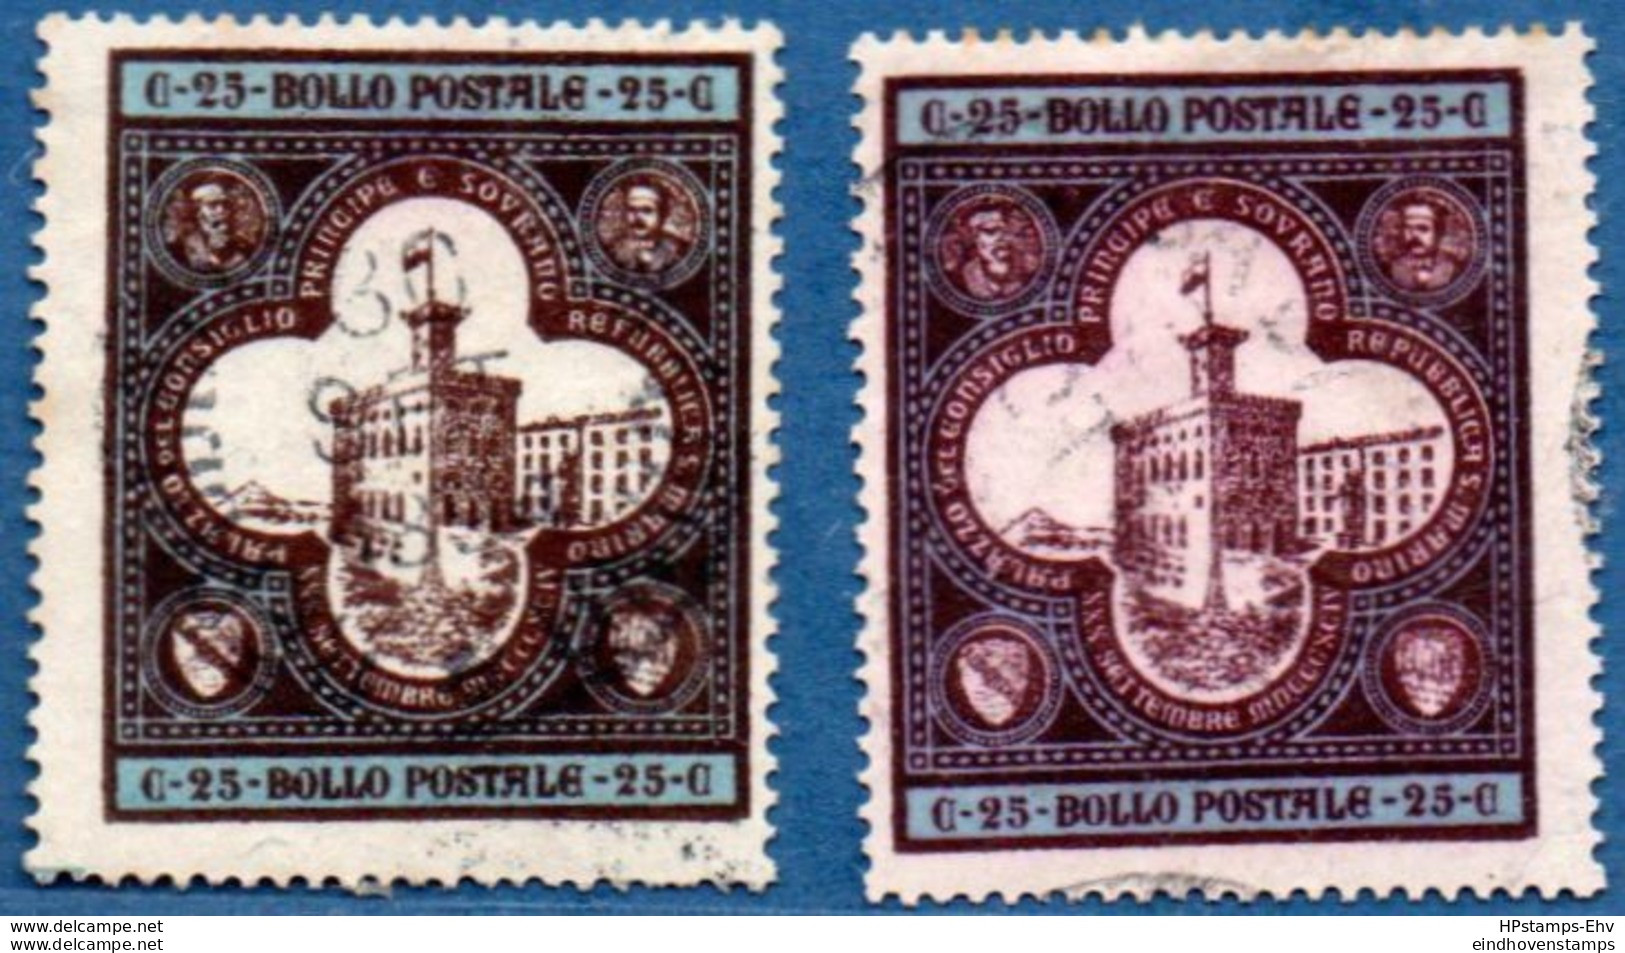 San Marino 1894 Inauguration Government Building 25 C 2 Values Cancelled - 2005.2621 Bright & Dull Printing - Used Stamps